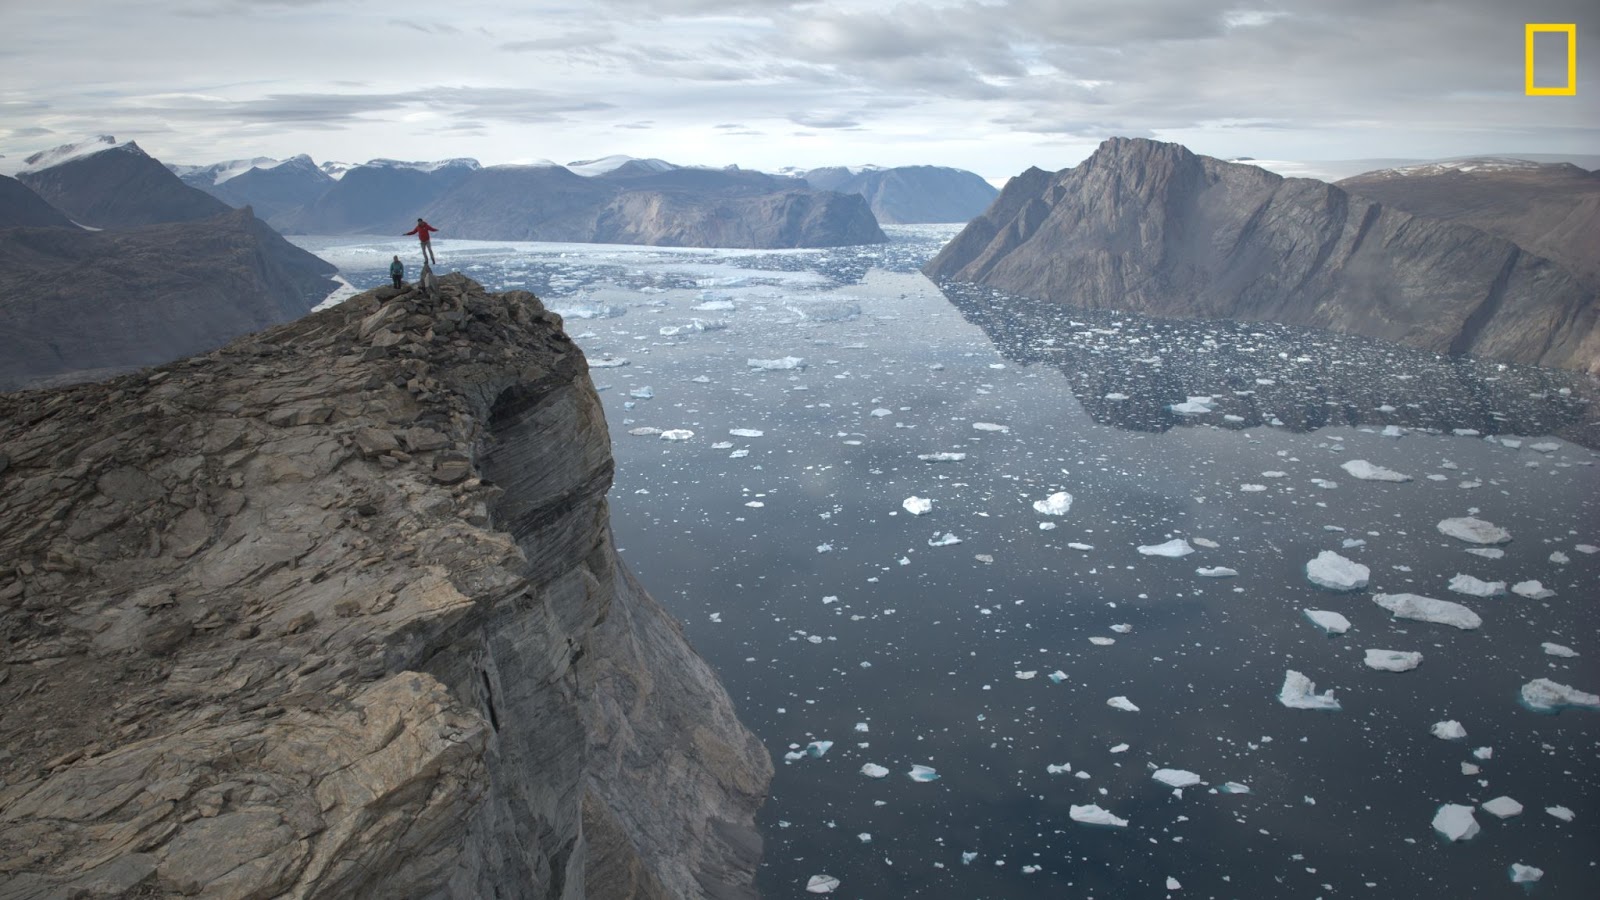 HONNOLD AND FINDLAY FIRST ASCENT OF REMOTE ARCTIC WALL